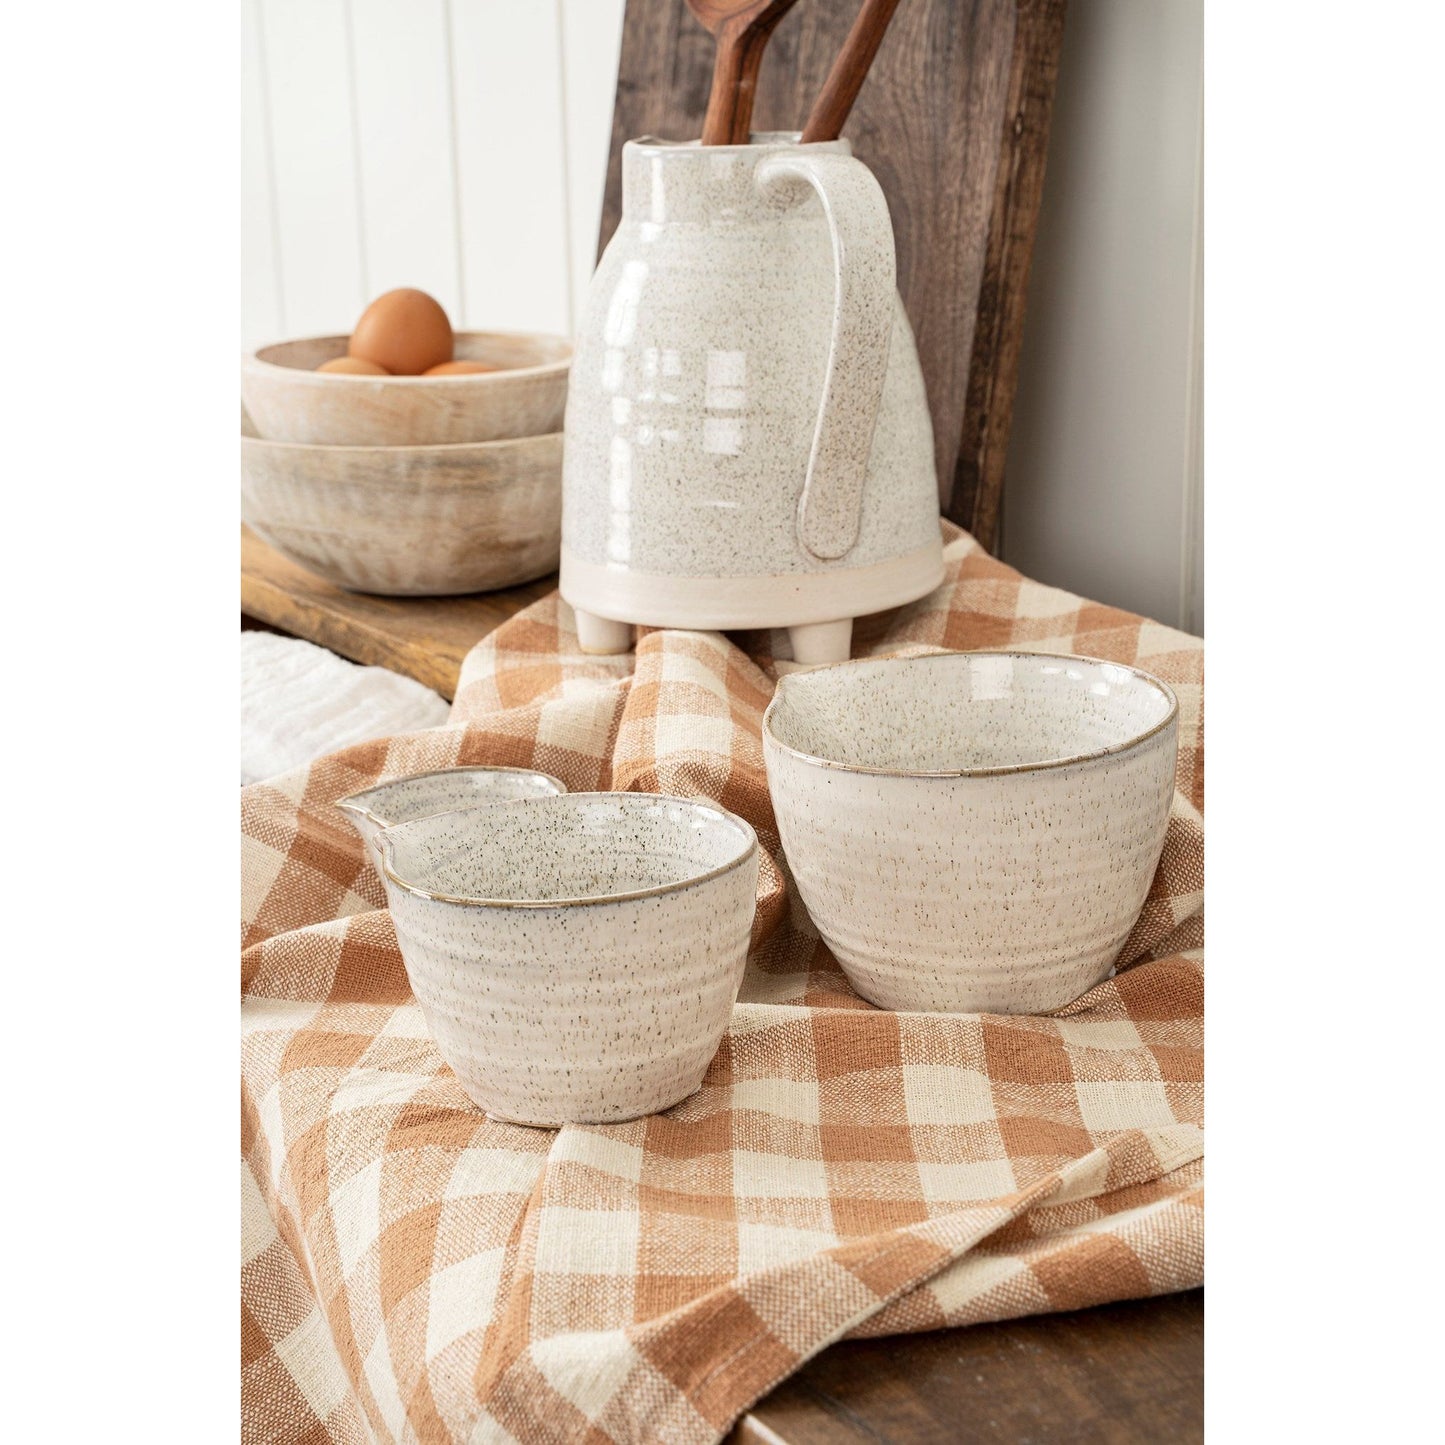 Galiano Spouted Bowls